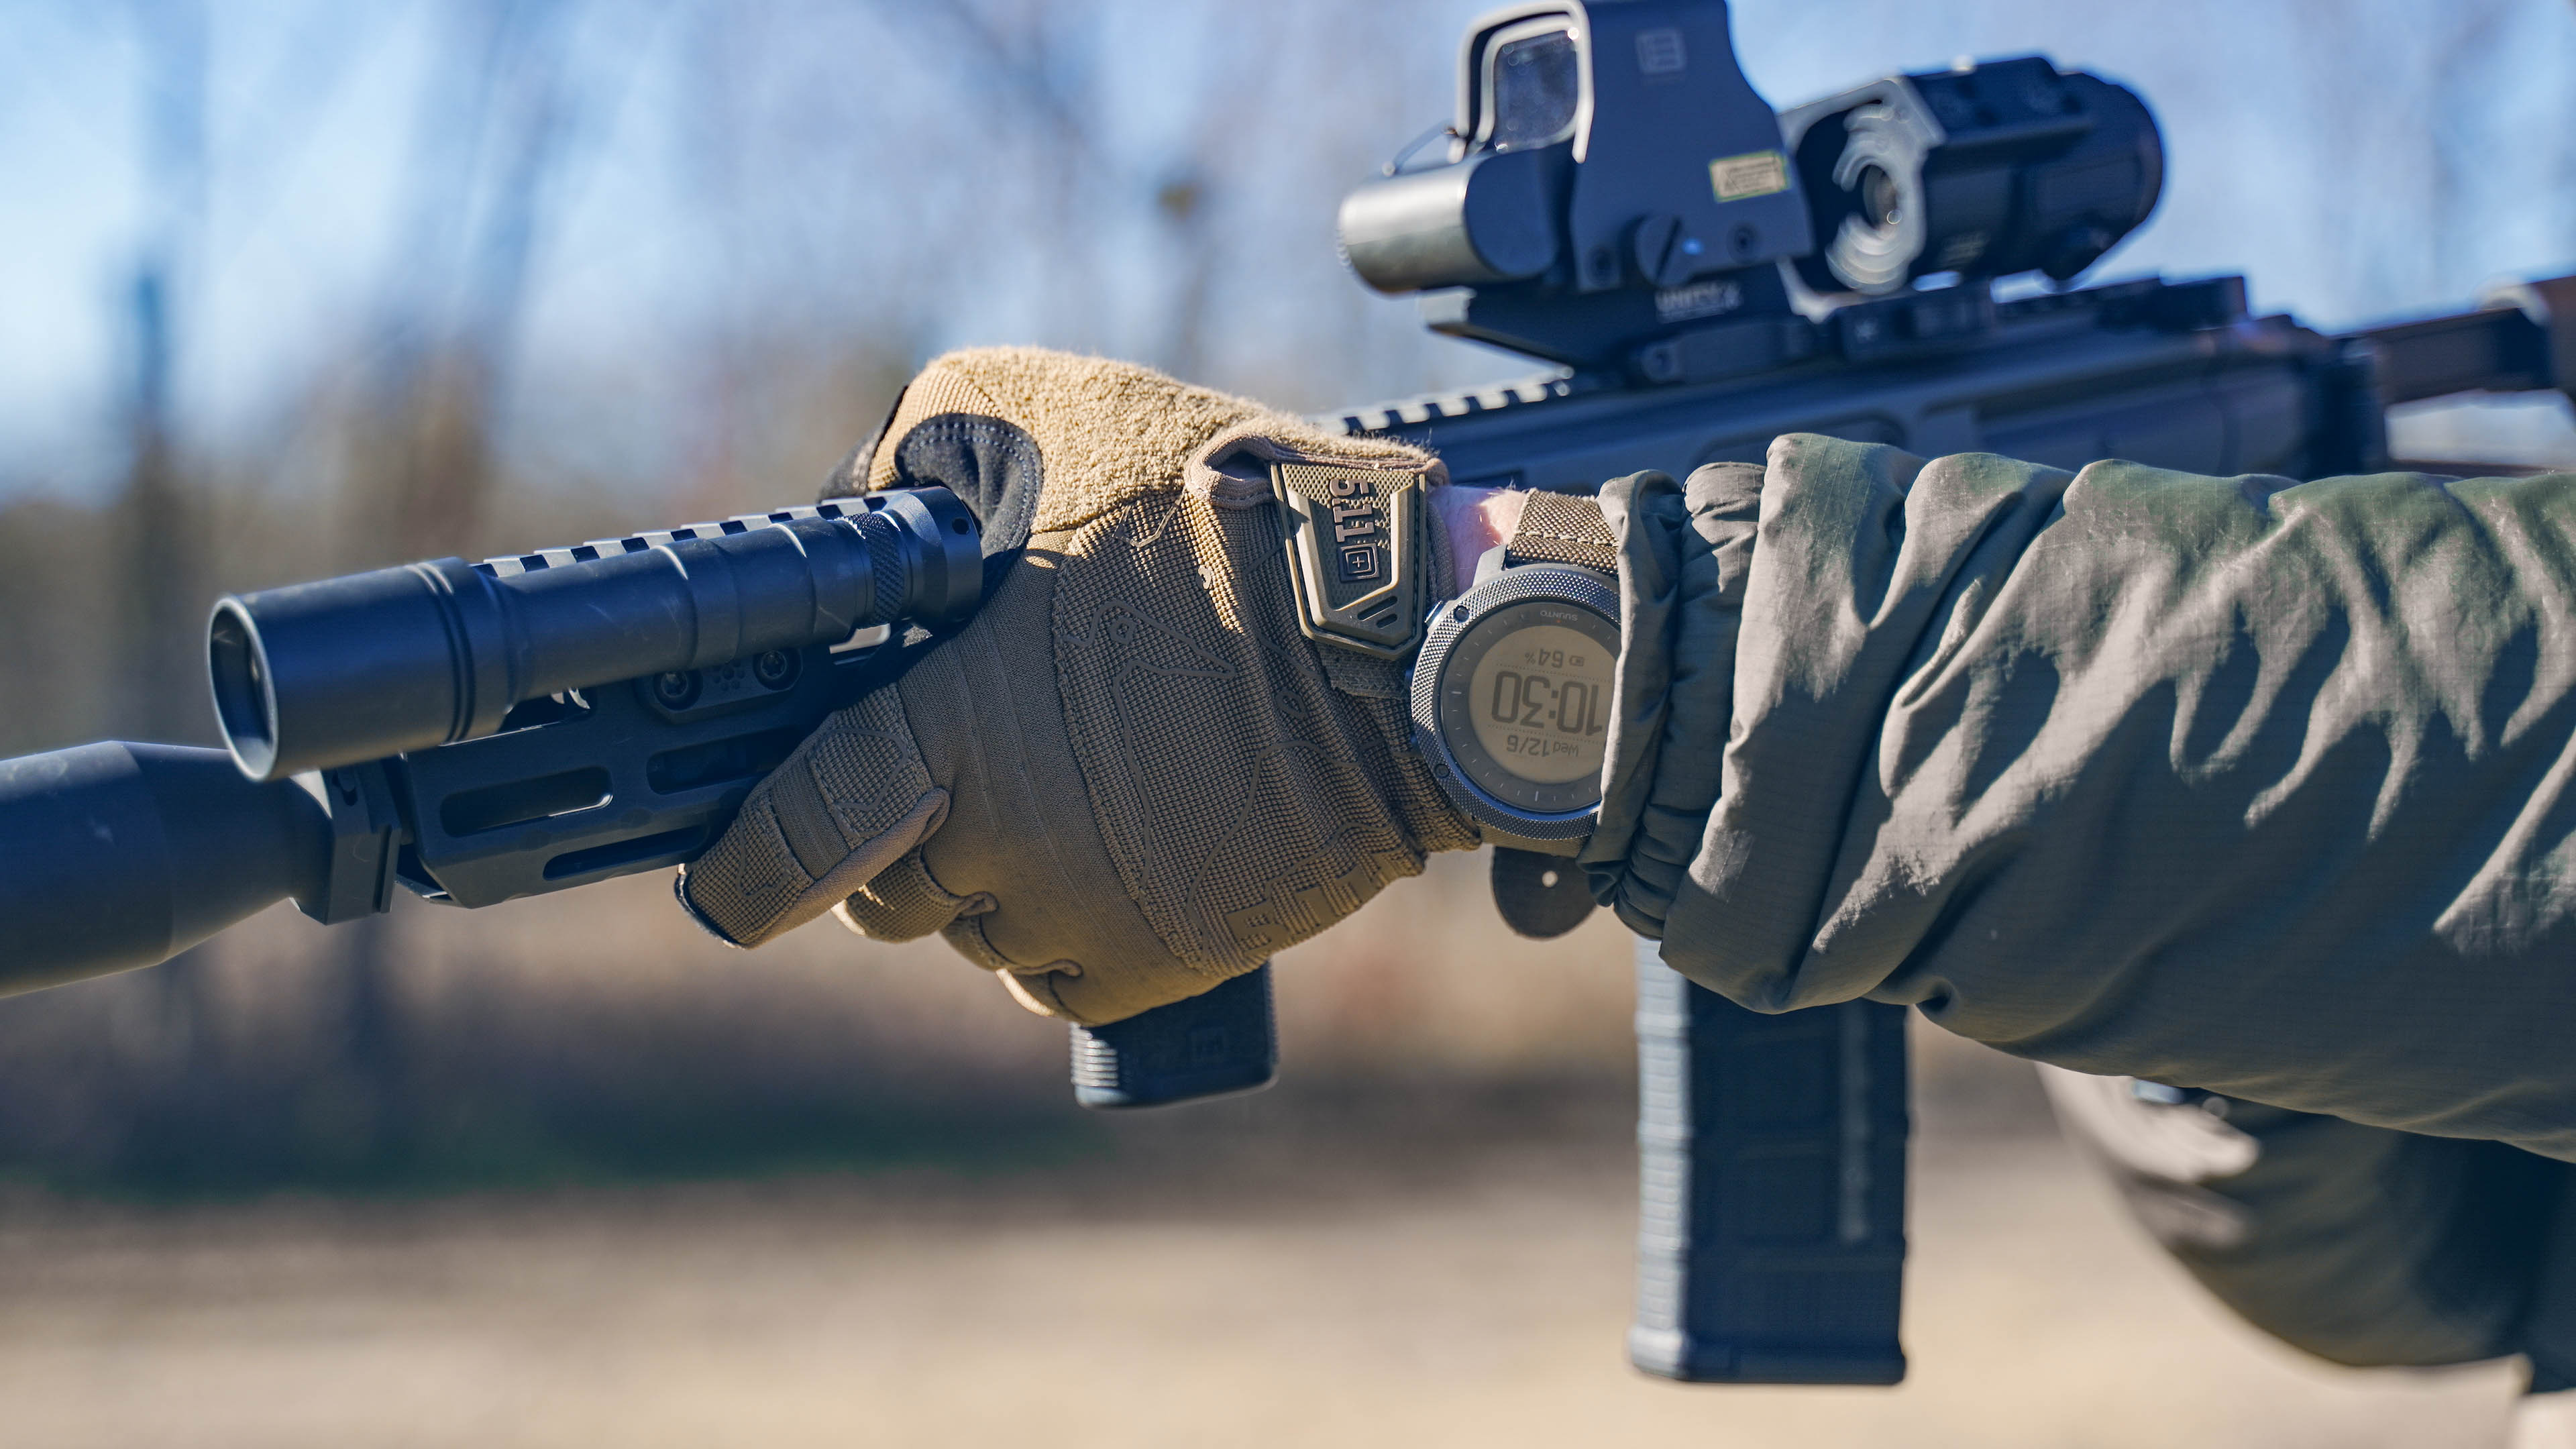 The 5.11 tactical gloves